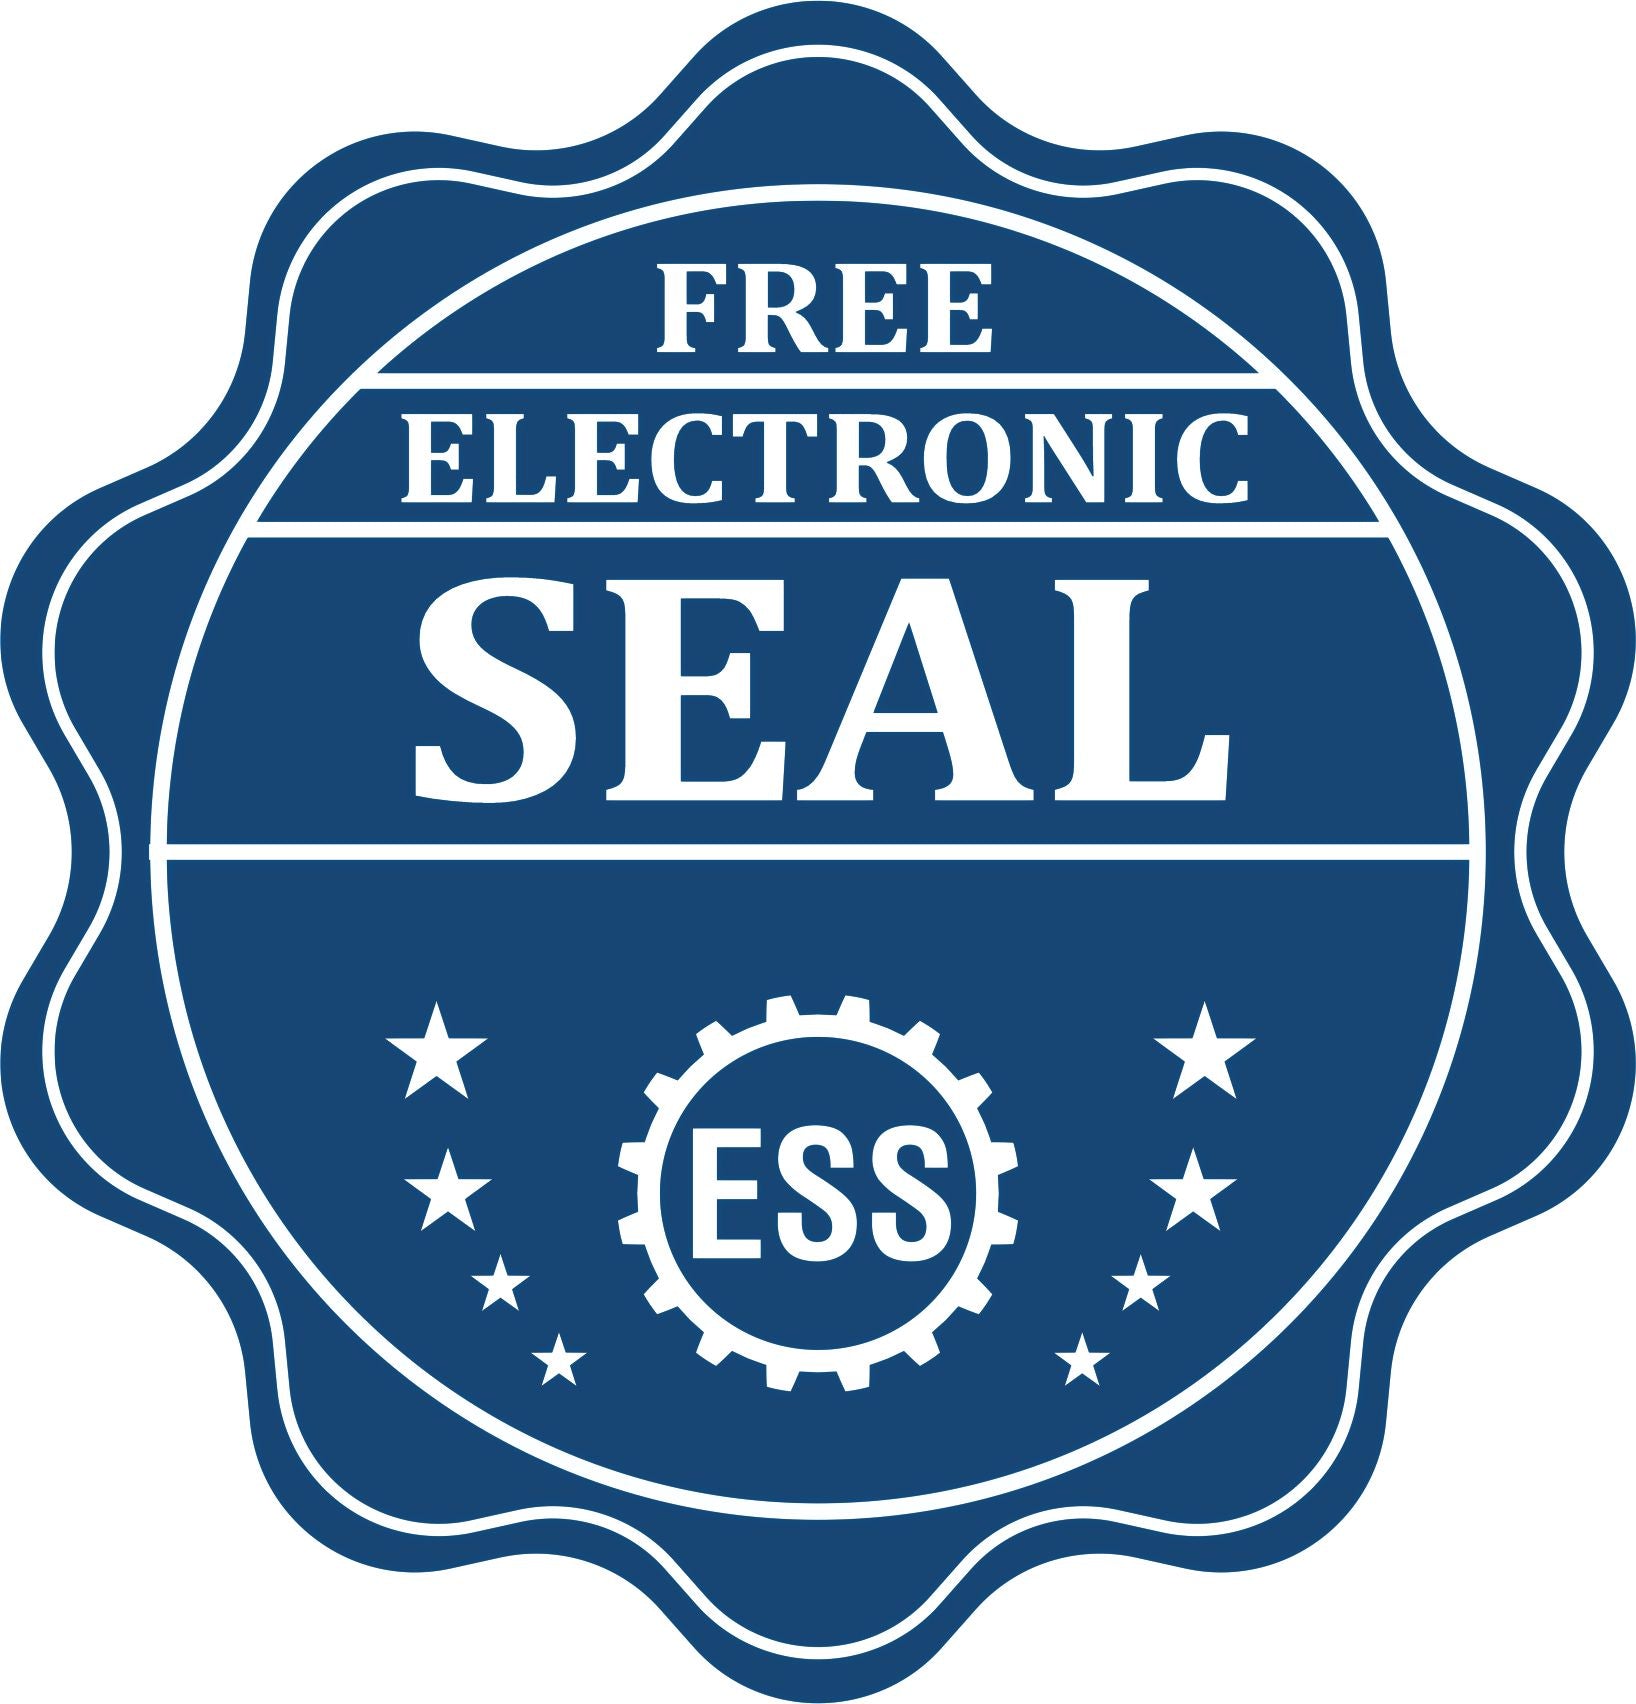 A badge showing a free electronic seal for the Hybrid South Dakota Geologist Seal with stars and the ESS gear on the emblem.